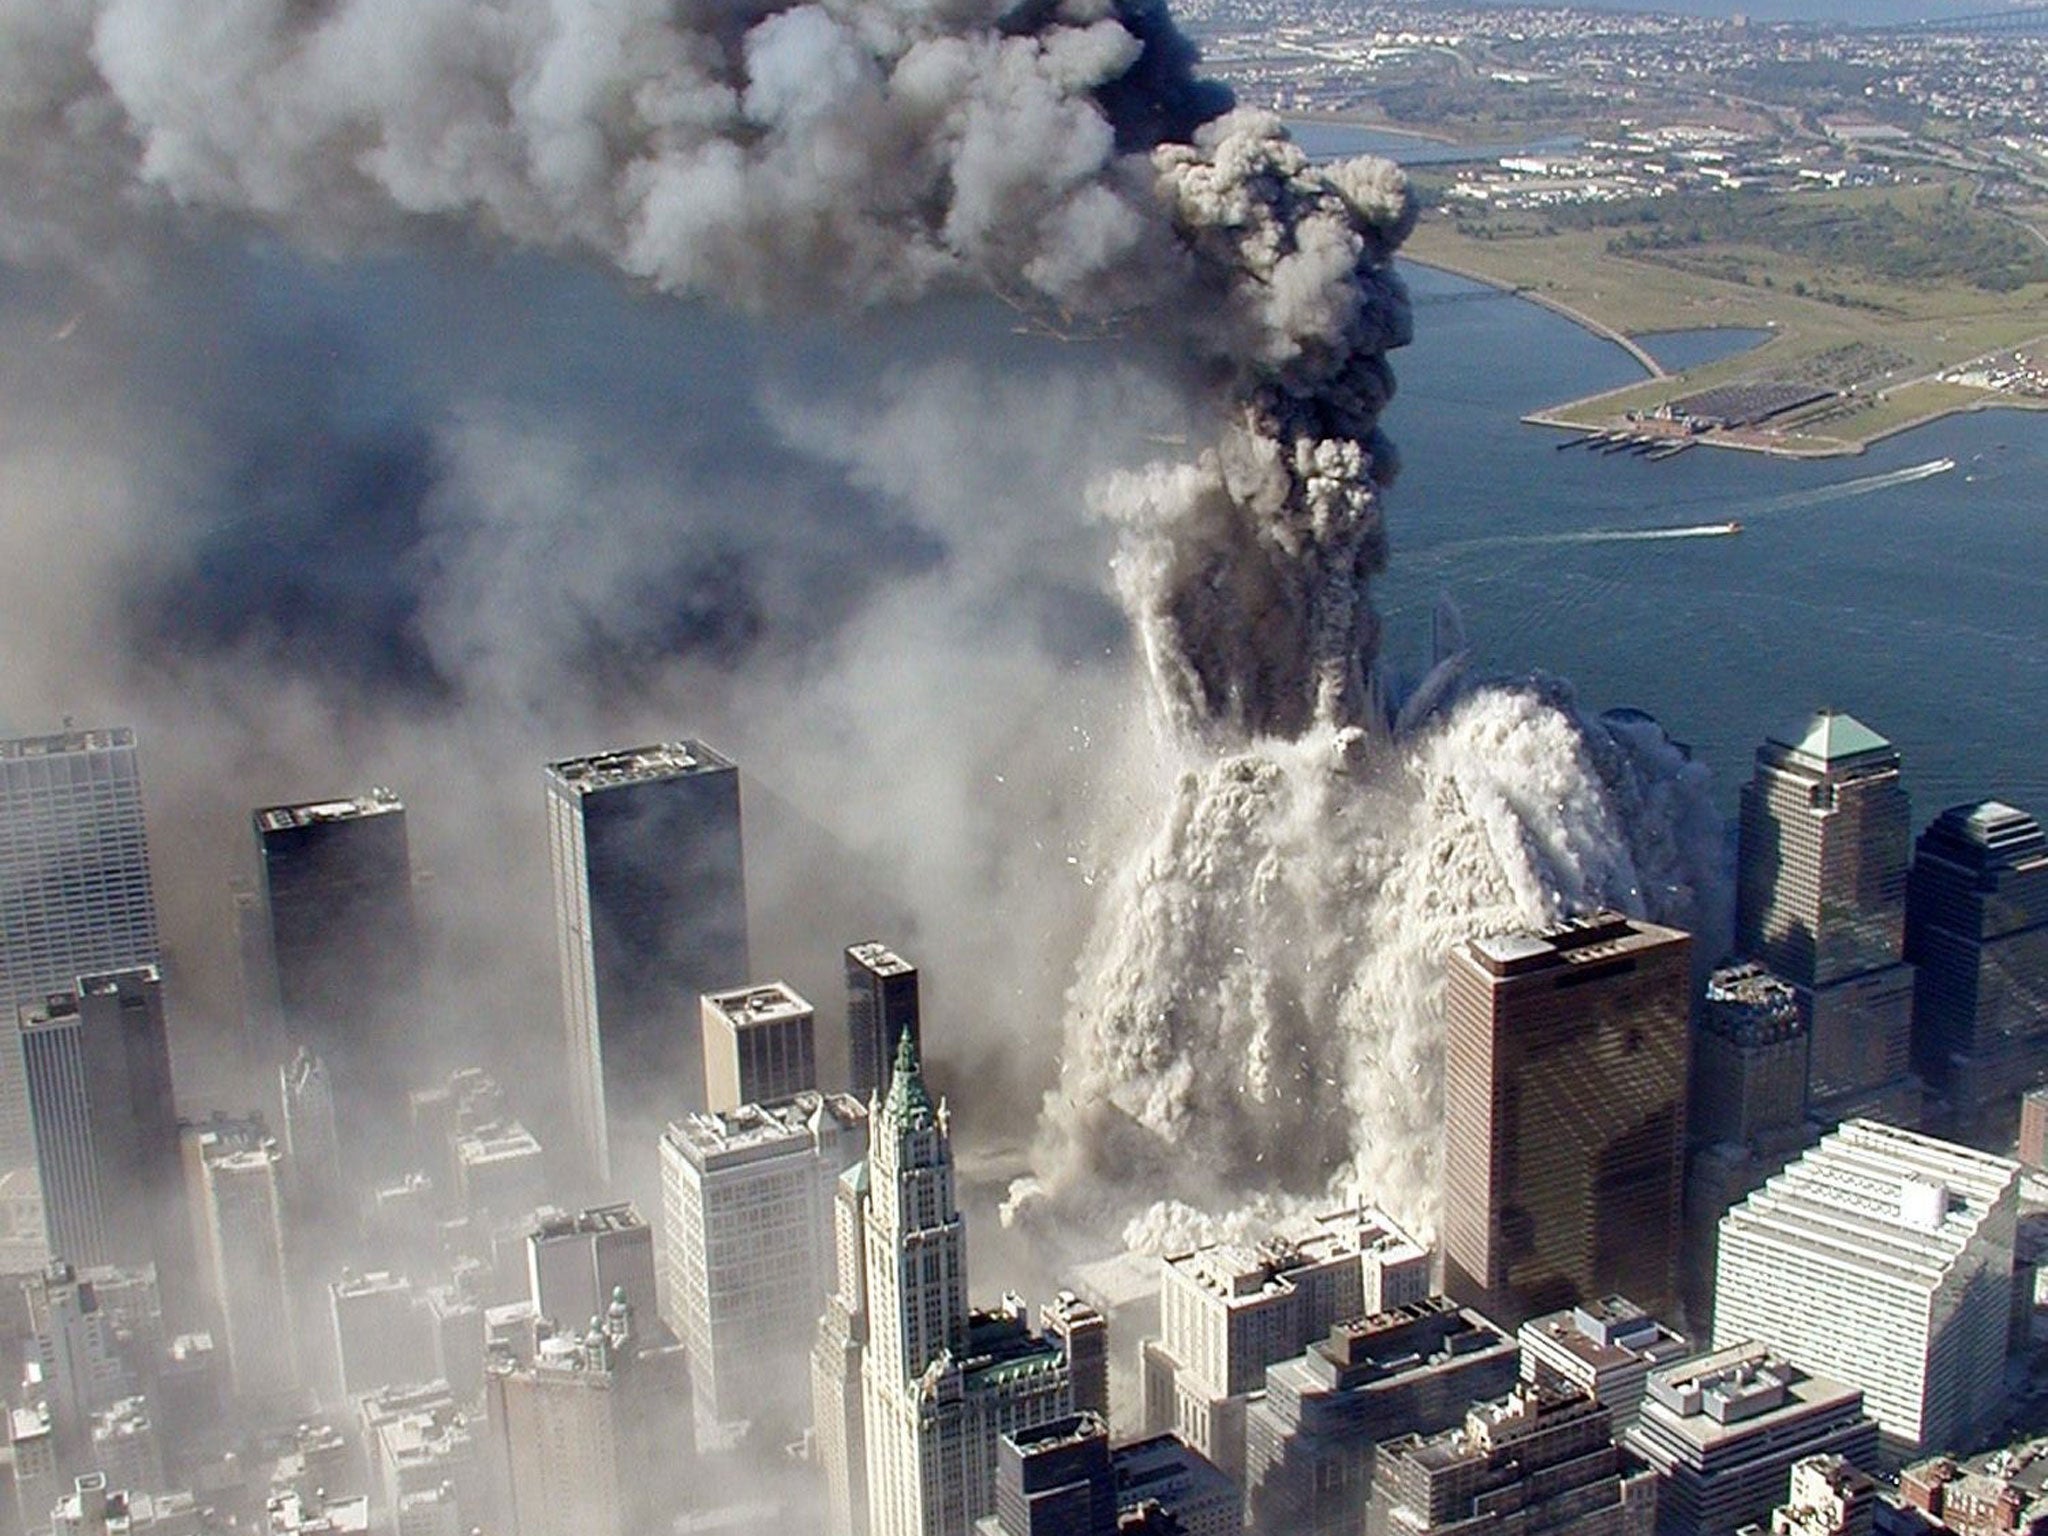 The CIA believe Abu Zubaydah was one of the planners of the 9/11 attacks on the World Trade Centre in New York and virtually every major attack by al-Qa'ida before that, including the 1998 US embassy bombings in East Africa